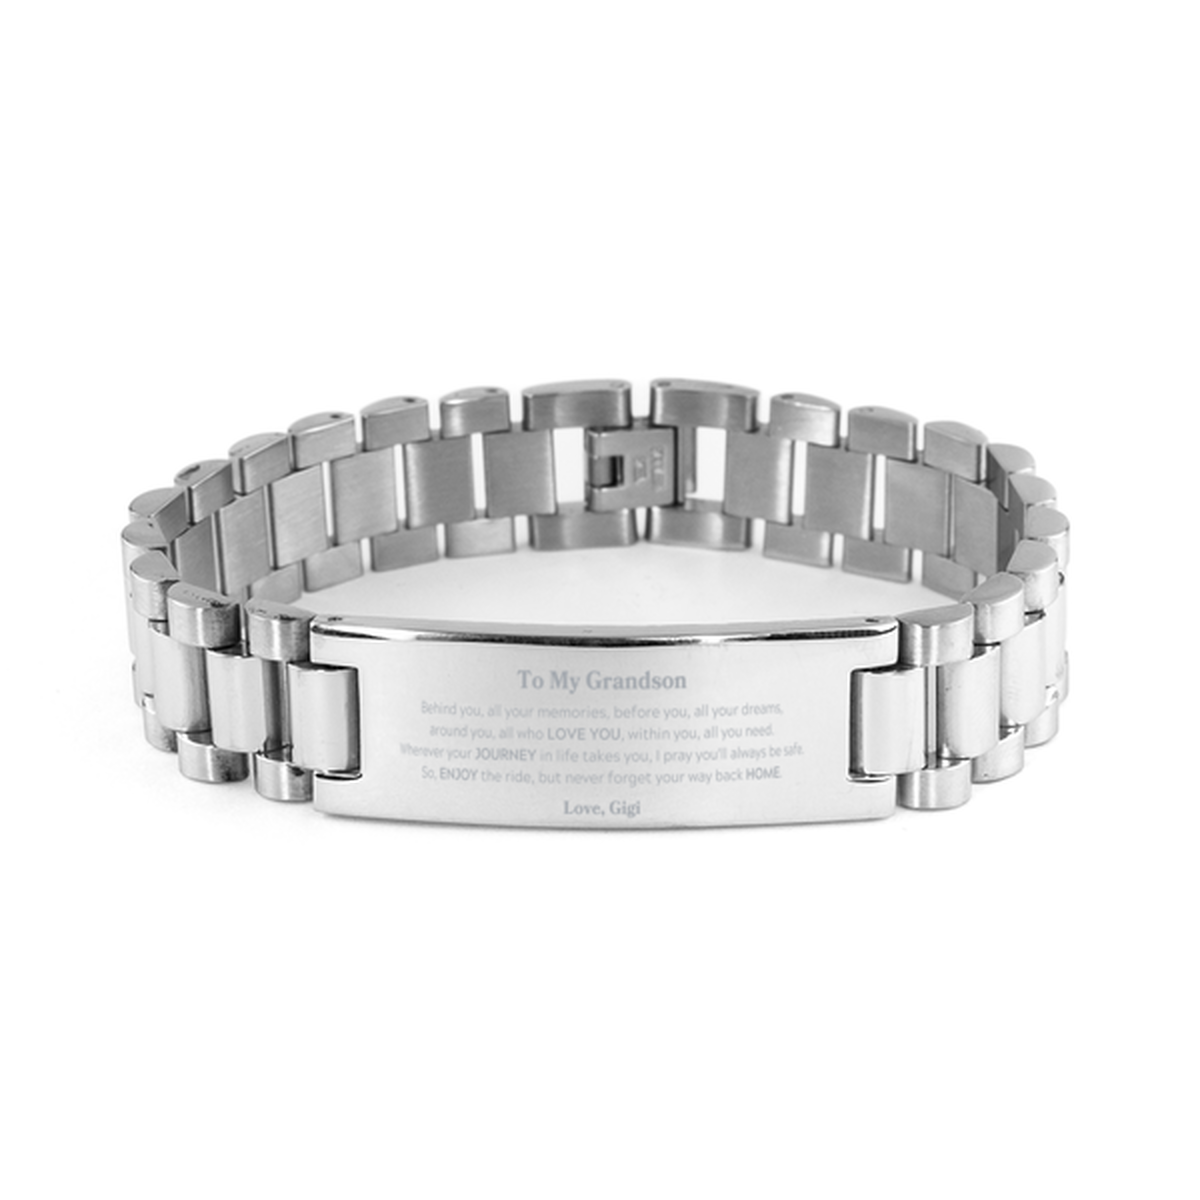 To My Grandson Graduation Gifts from Gigi, Grandson Ladder Stainless Steel Bracelet Christmas Birthday Gifts for Grandson Behind you, all your memories, before you, all your dreams. Love, Gigi